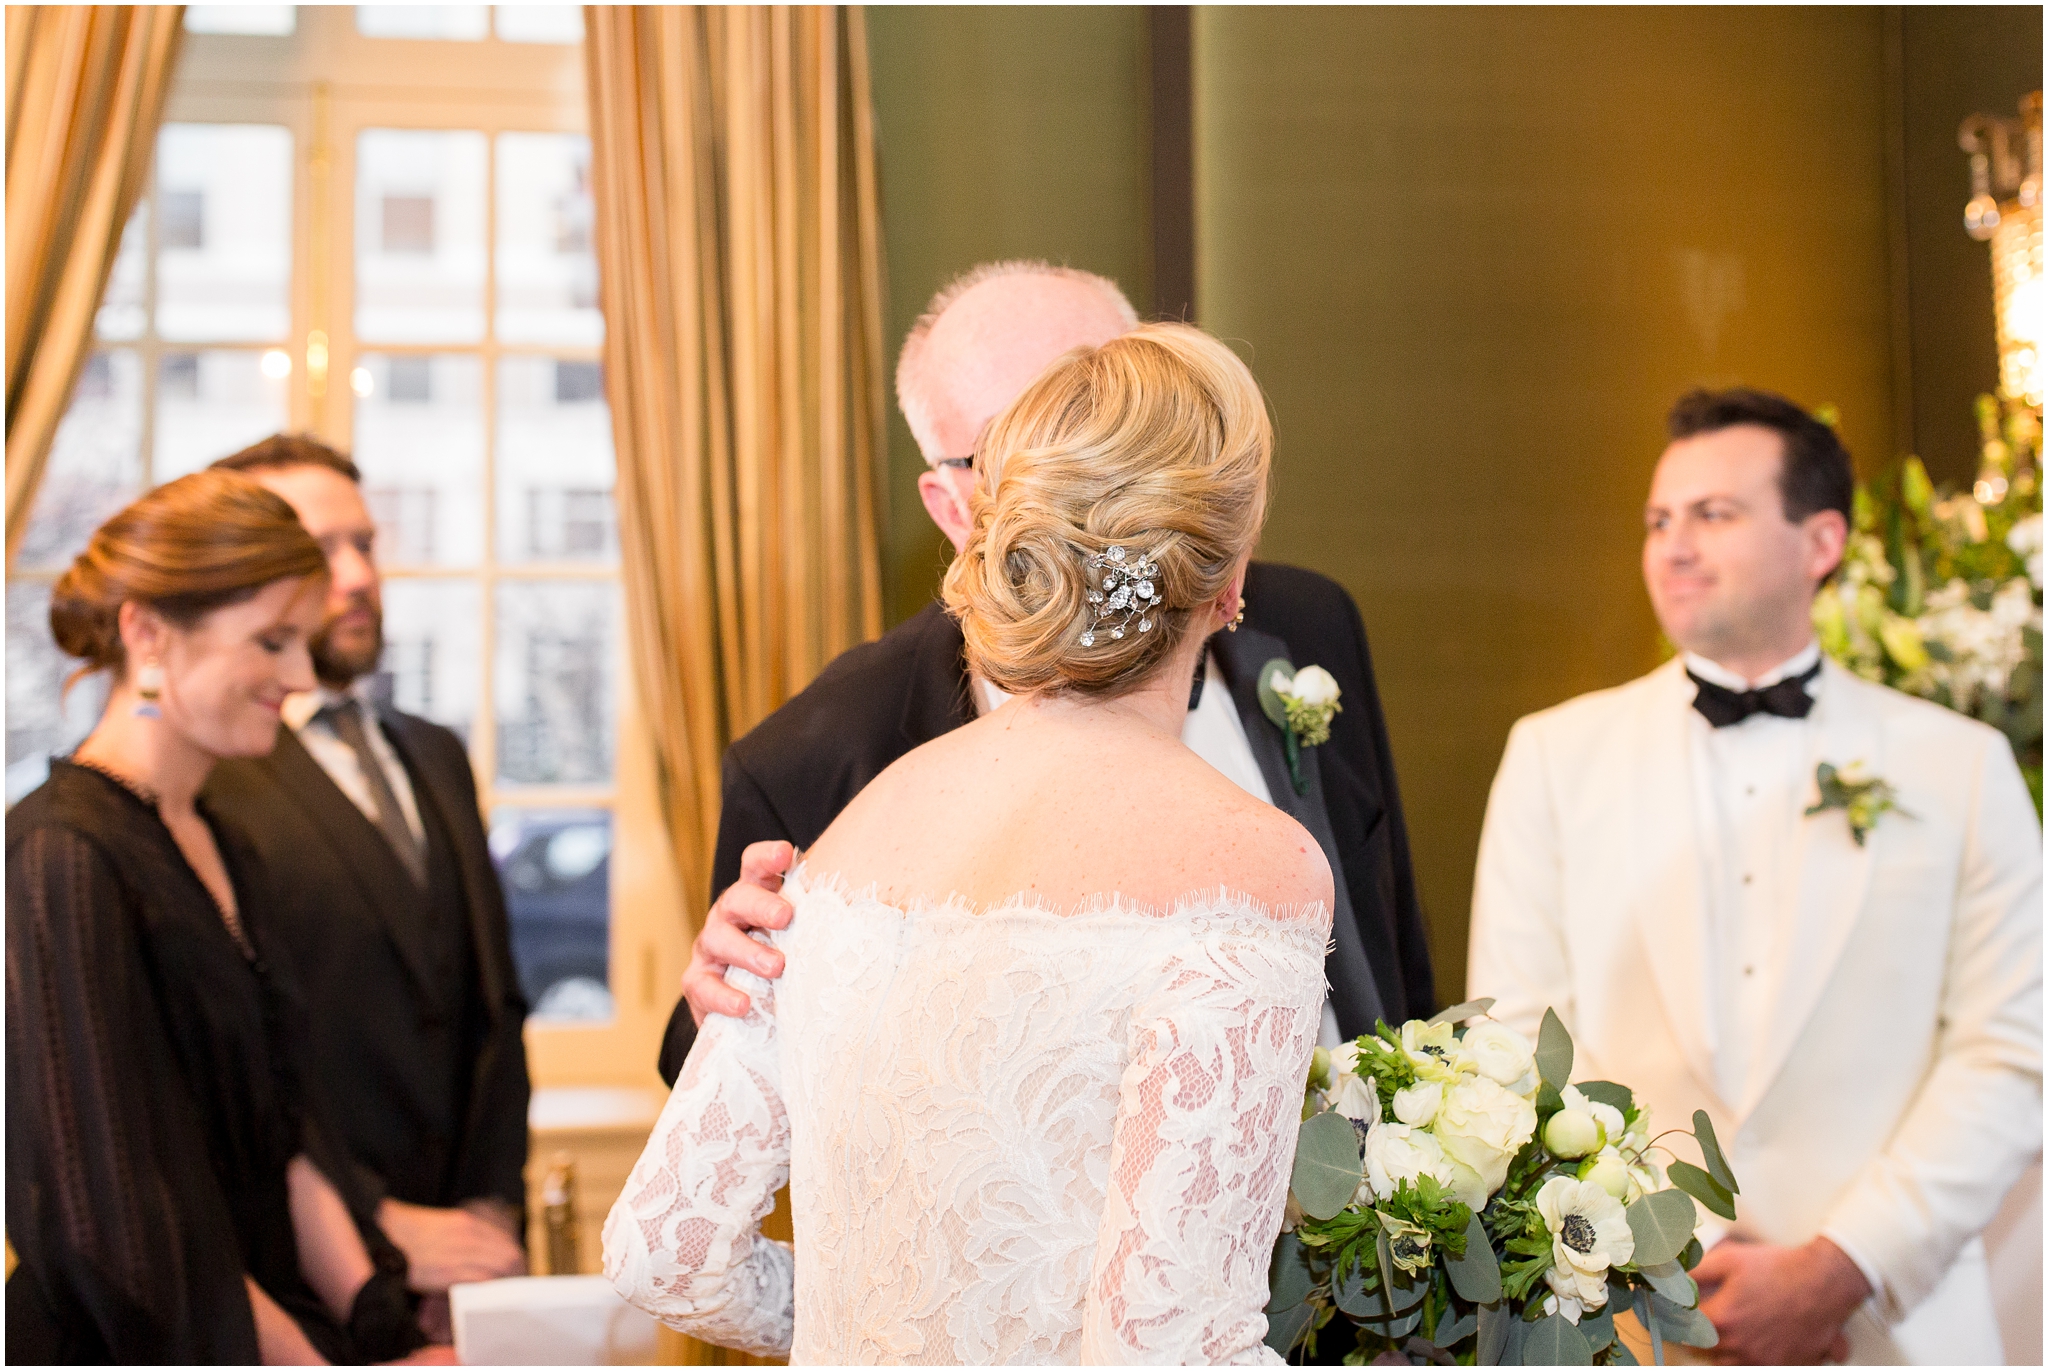 Elegant Jefferson Hotel wedding with art-deco style and gold accents